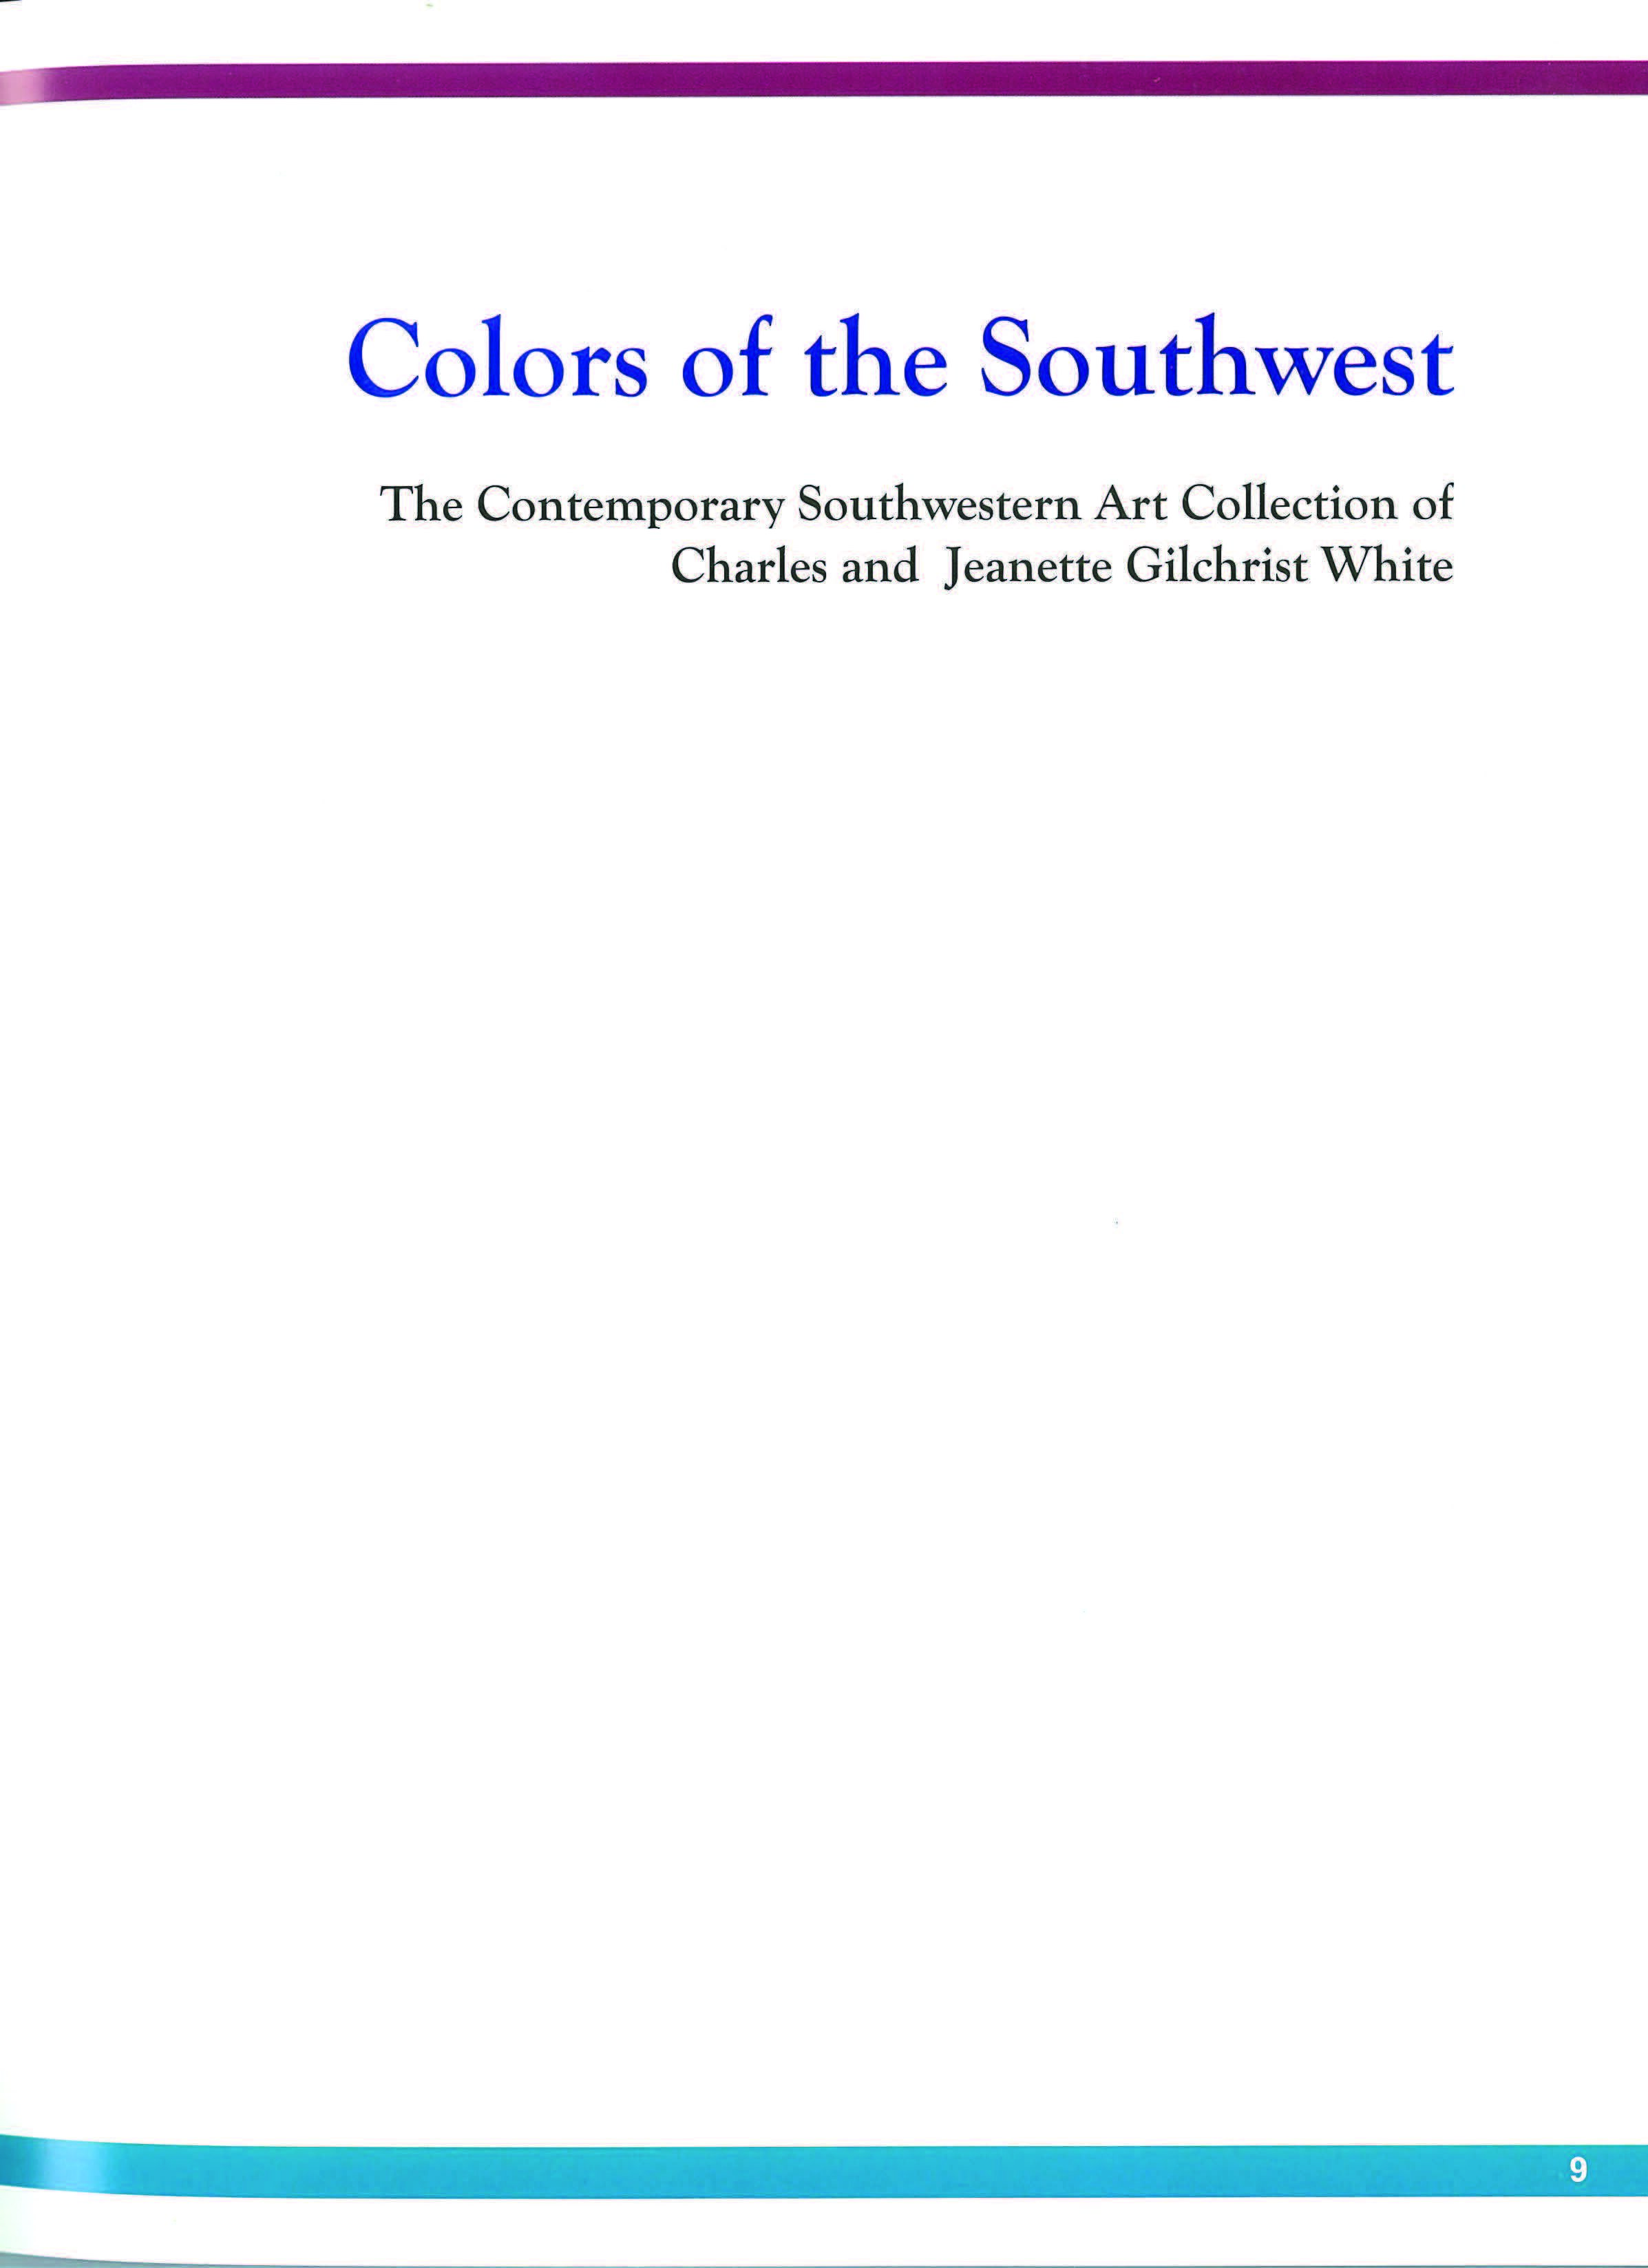 ColorsOFtheSouthwest_Page_8.jpg